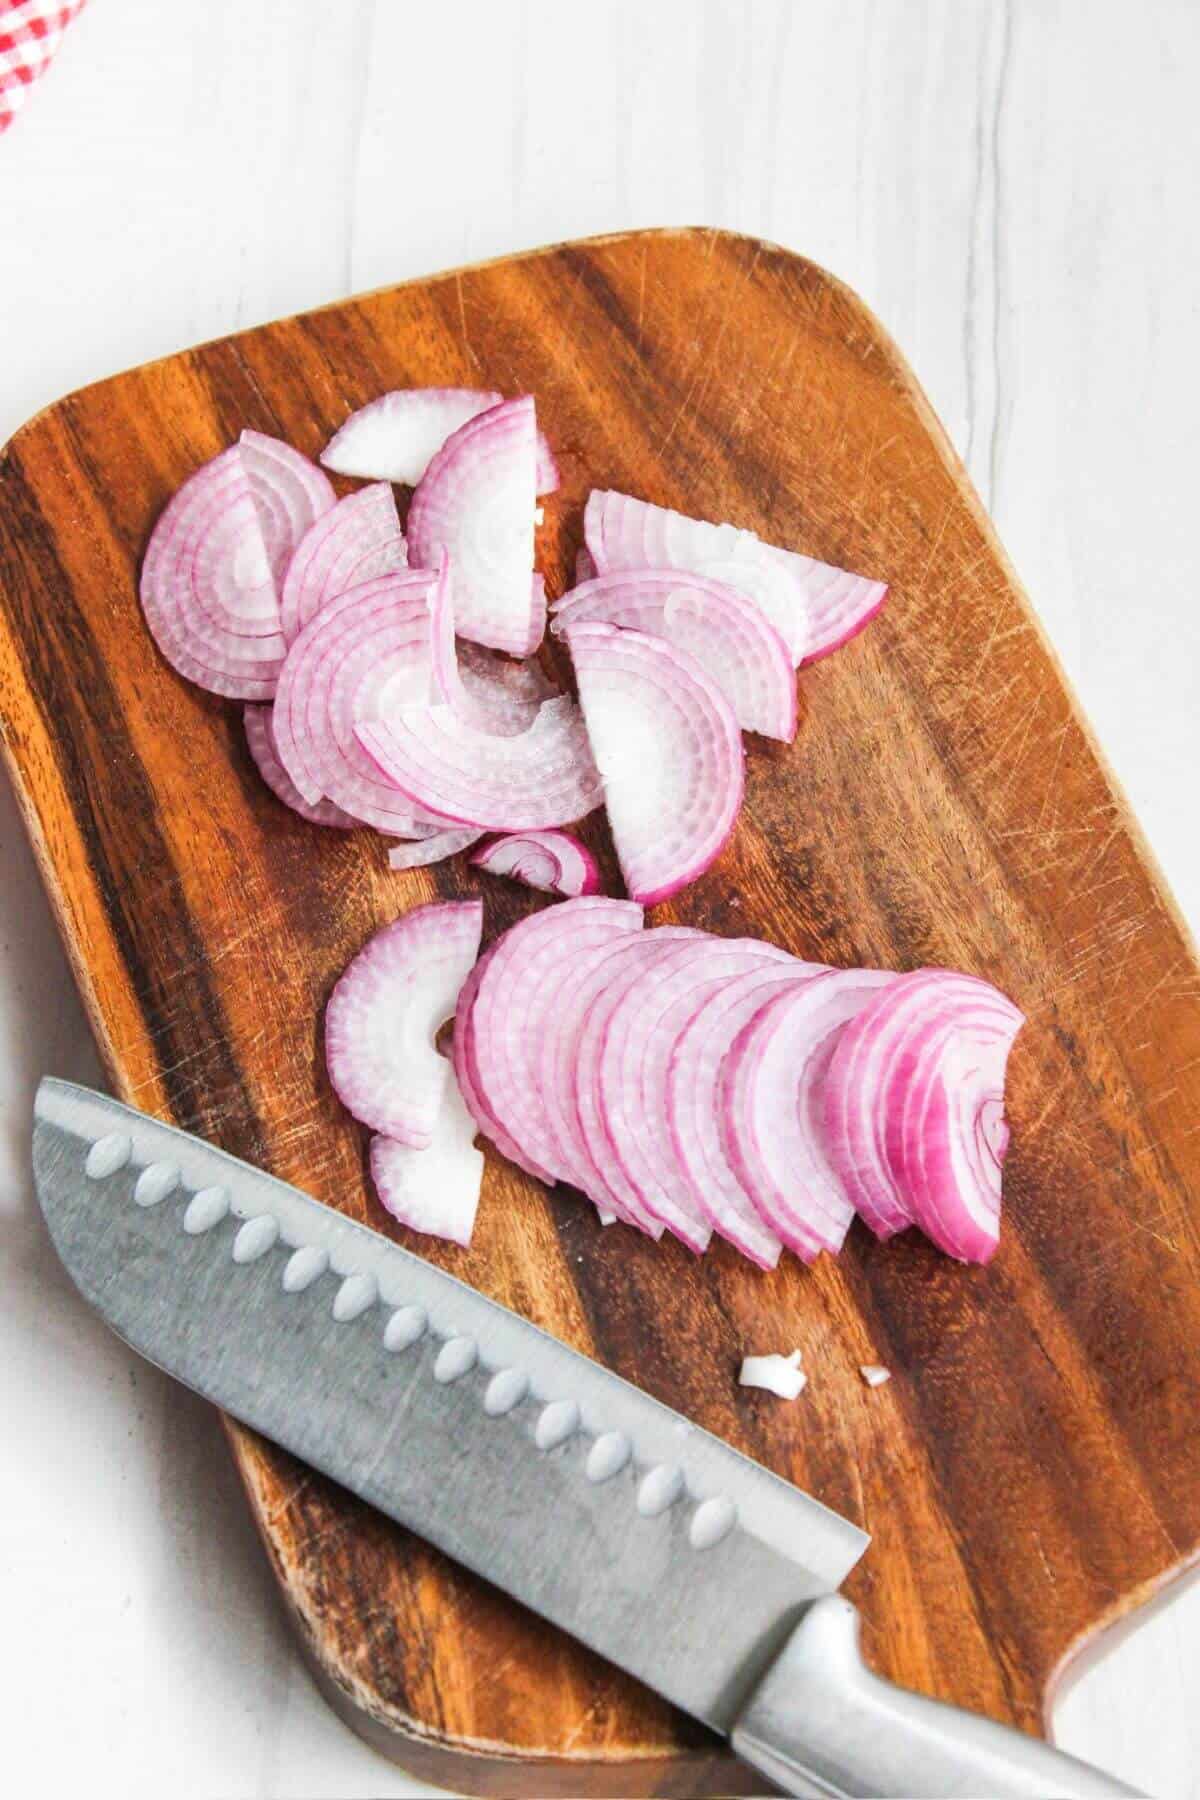 Sliced red onions on a cutting board with a knife.